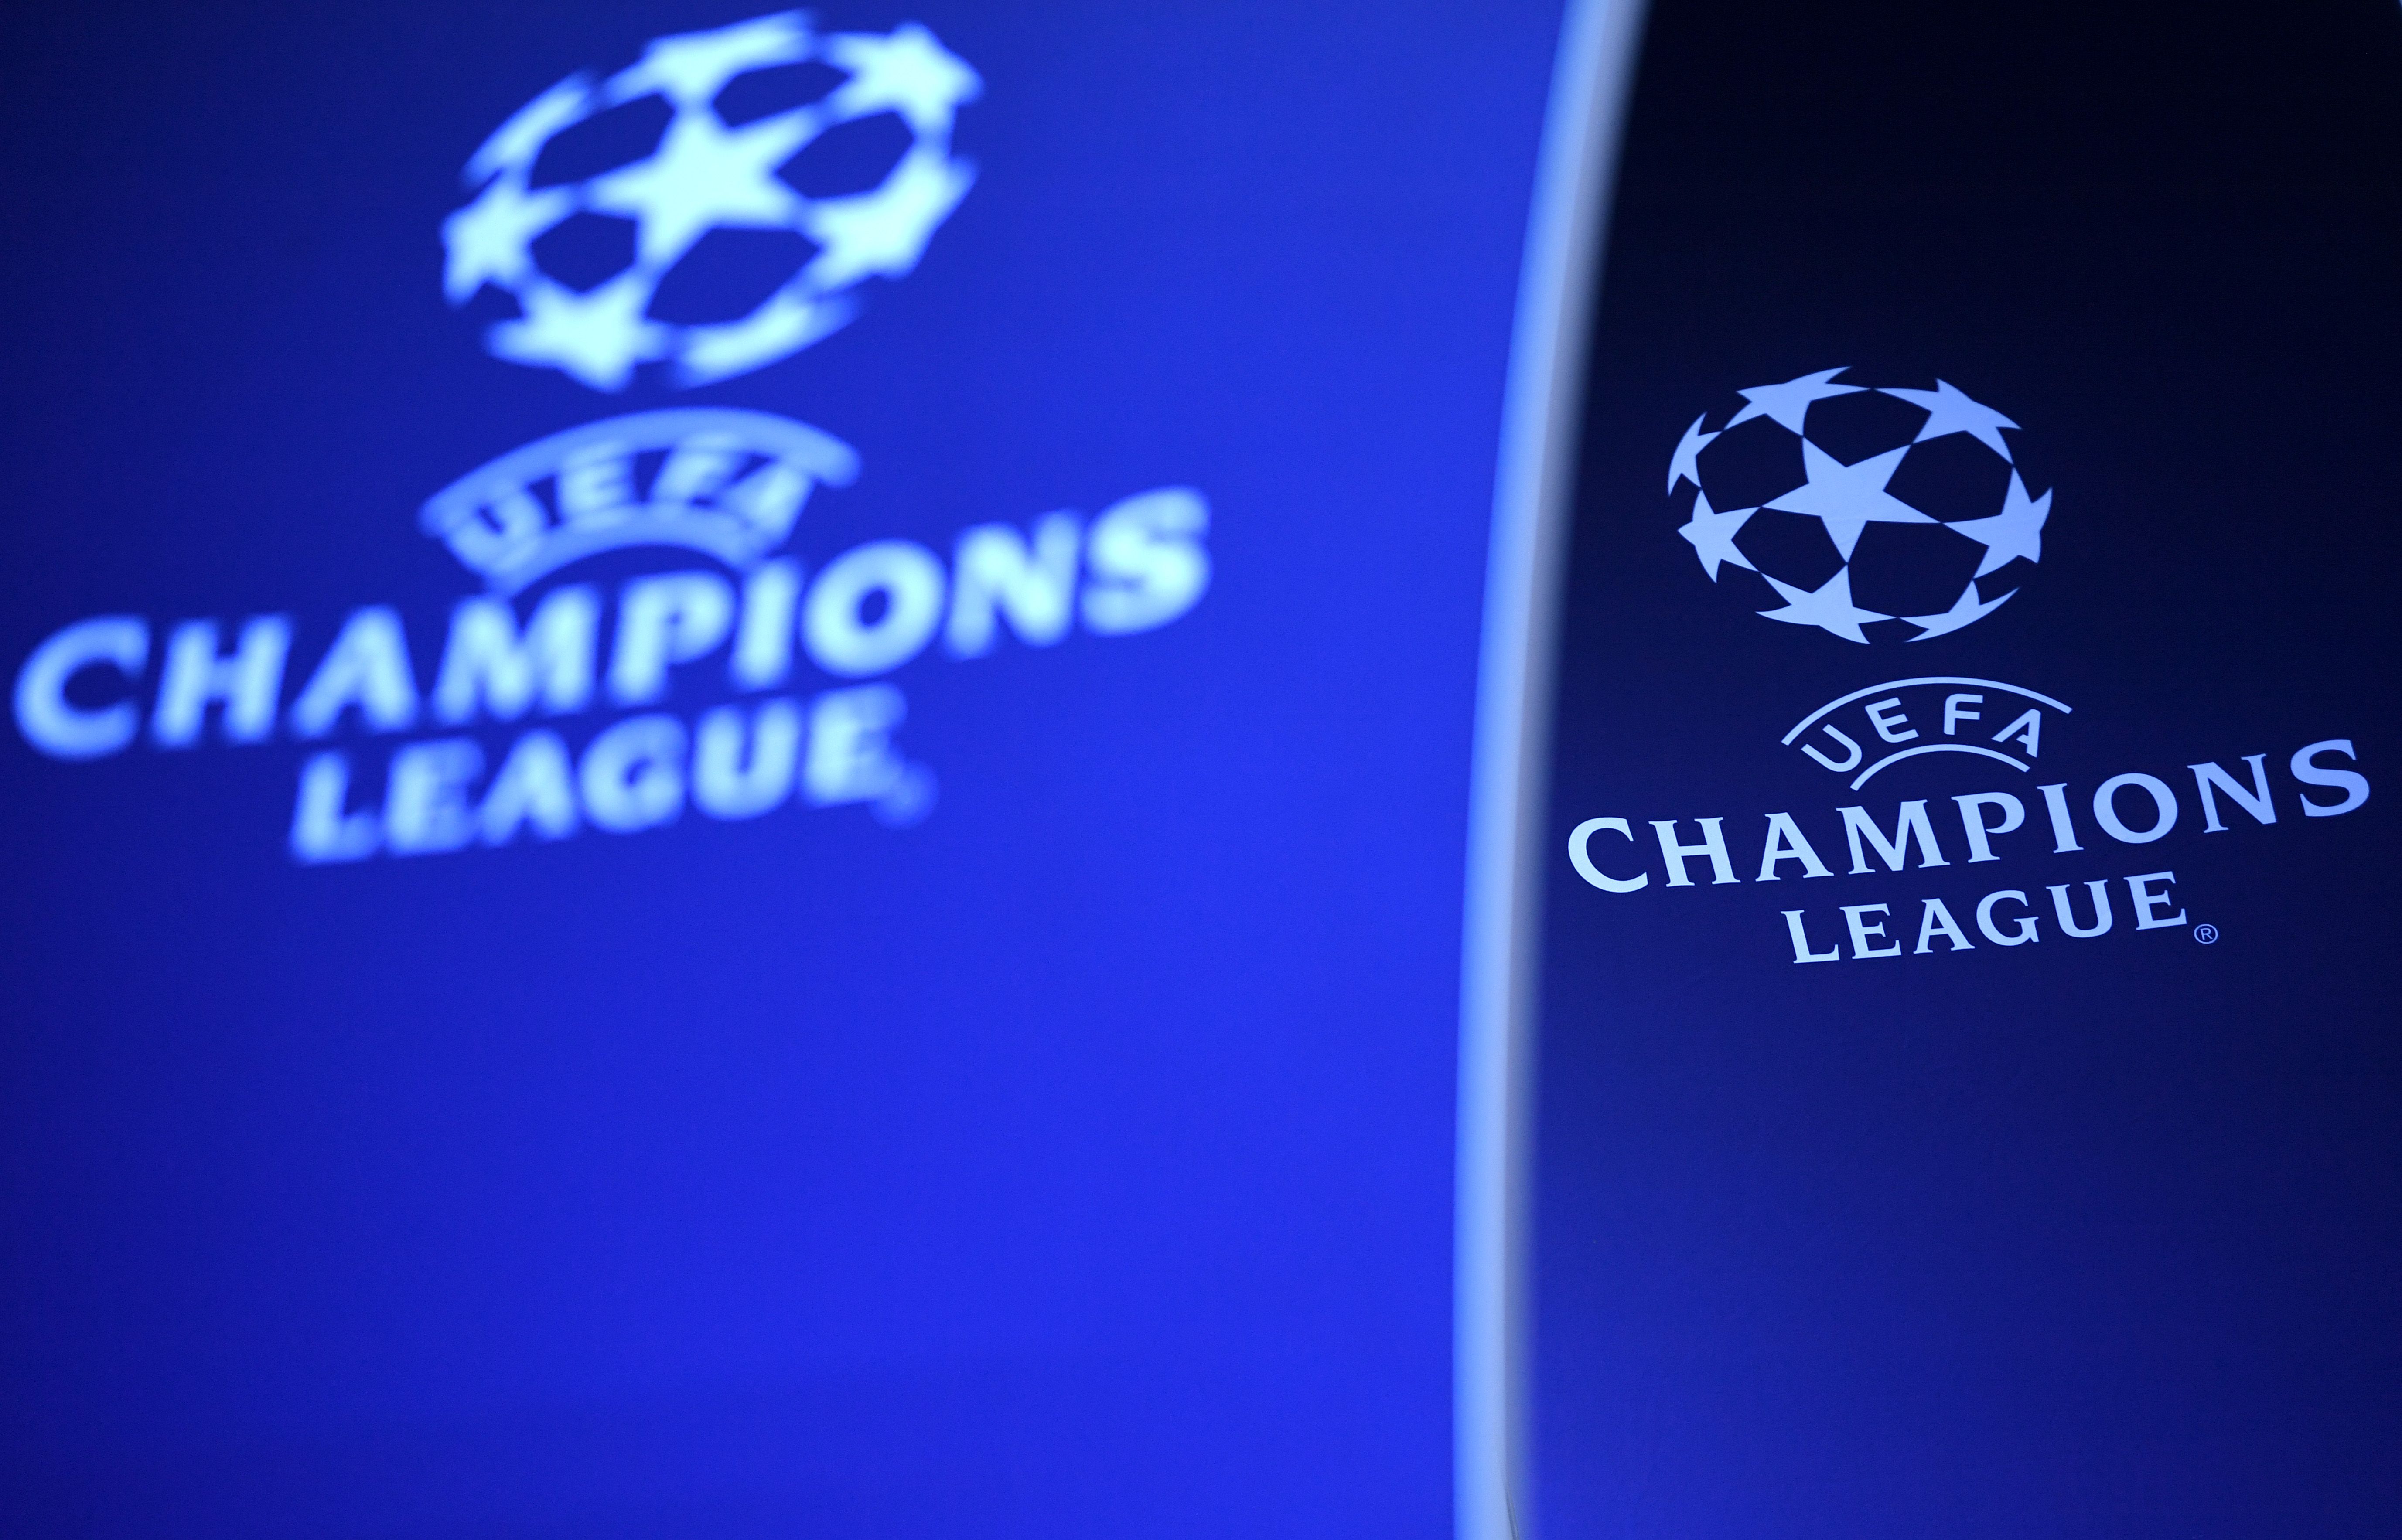 The official UEFA Champions League logo